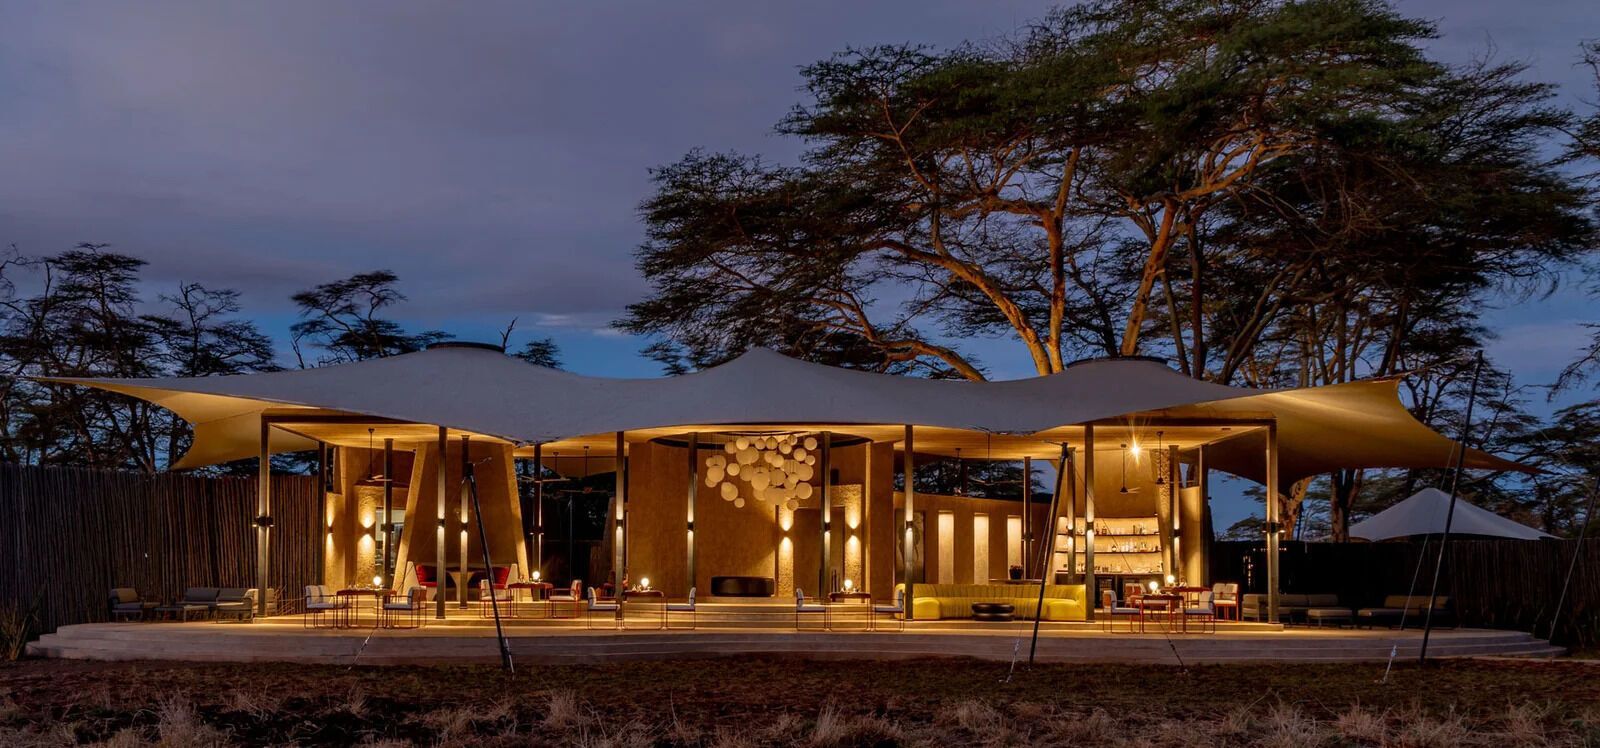 Top 8 luxury safaris in Africa: with lavish accommodations, exciting adventures, and plenty of wildlife around